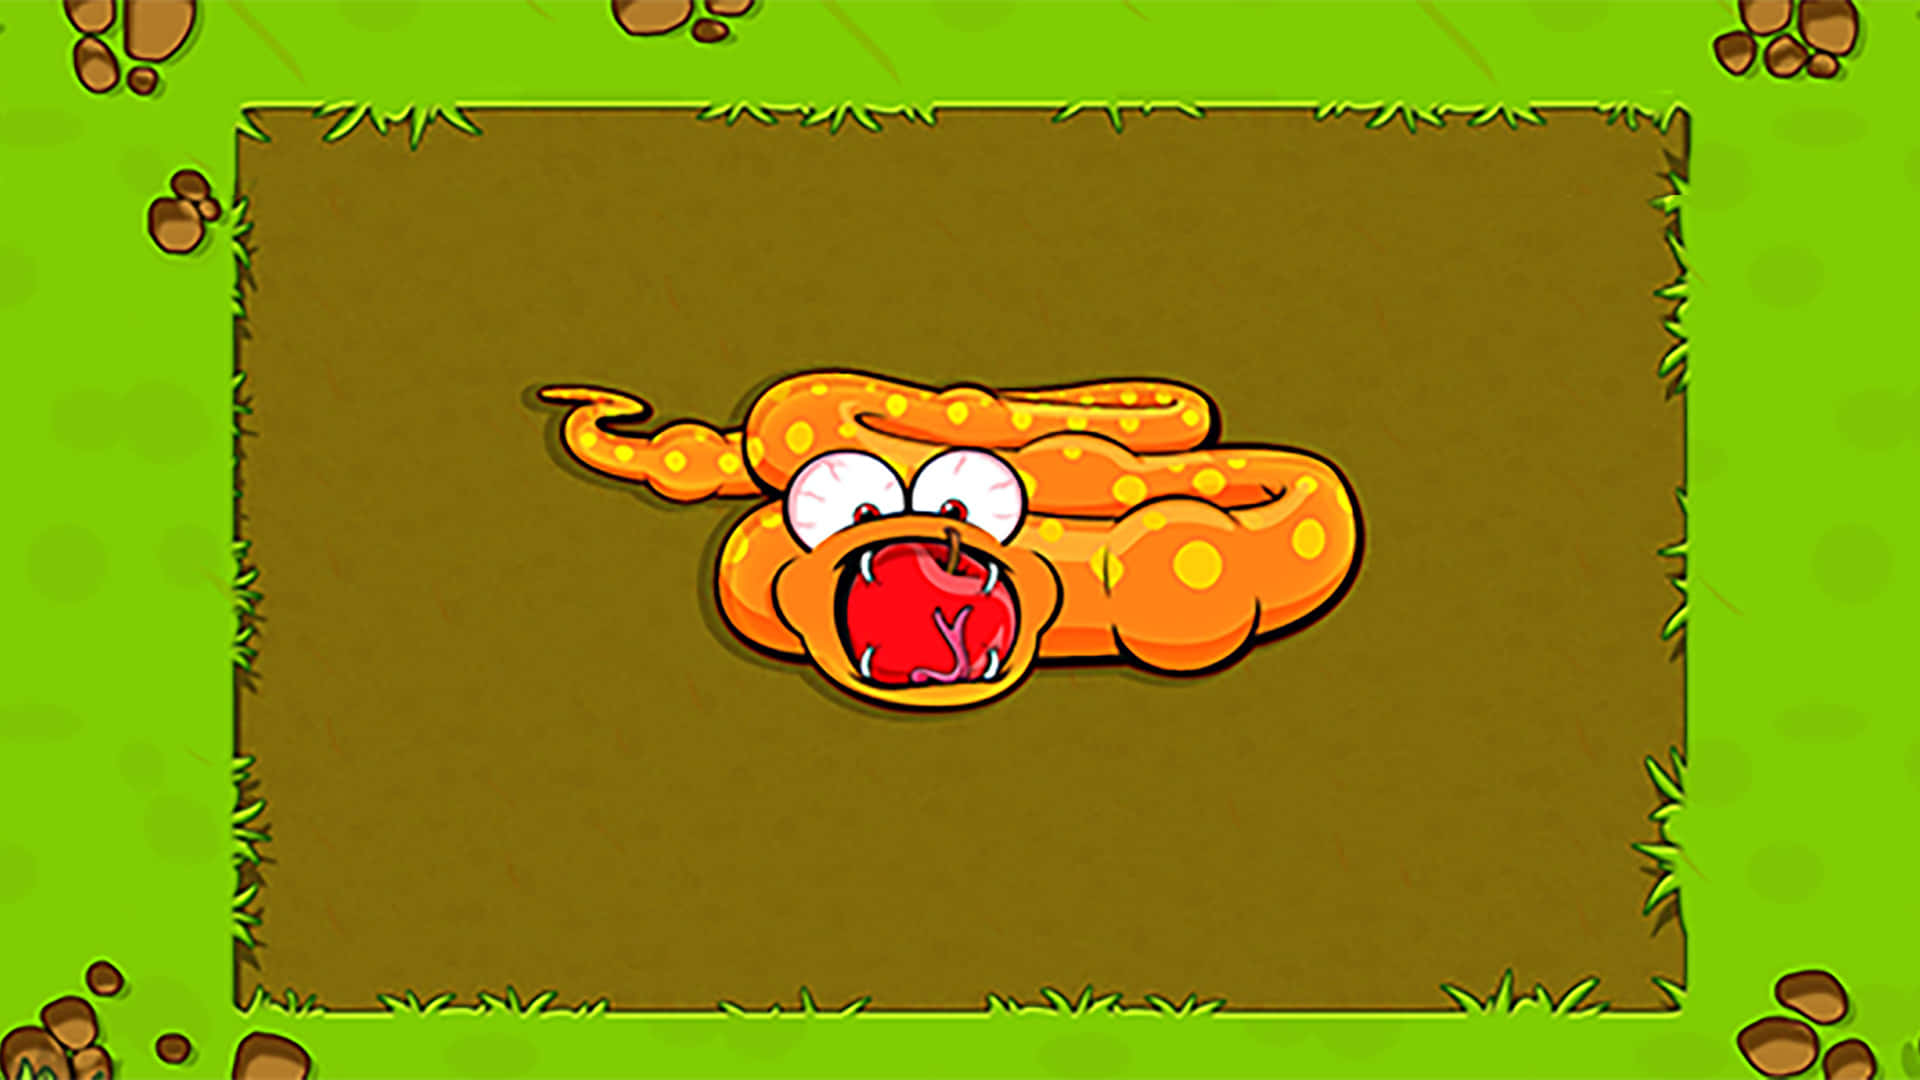 Conquer levels and rule the snake game!